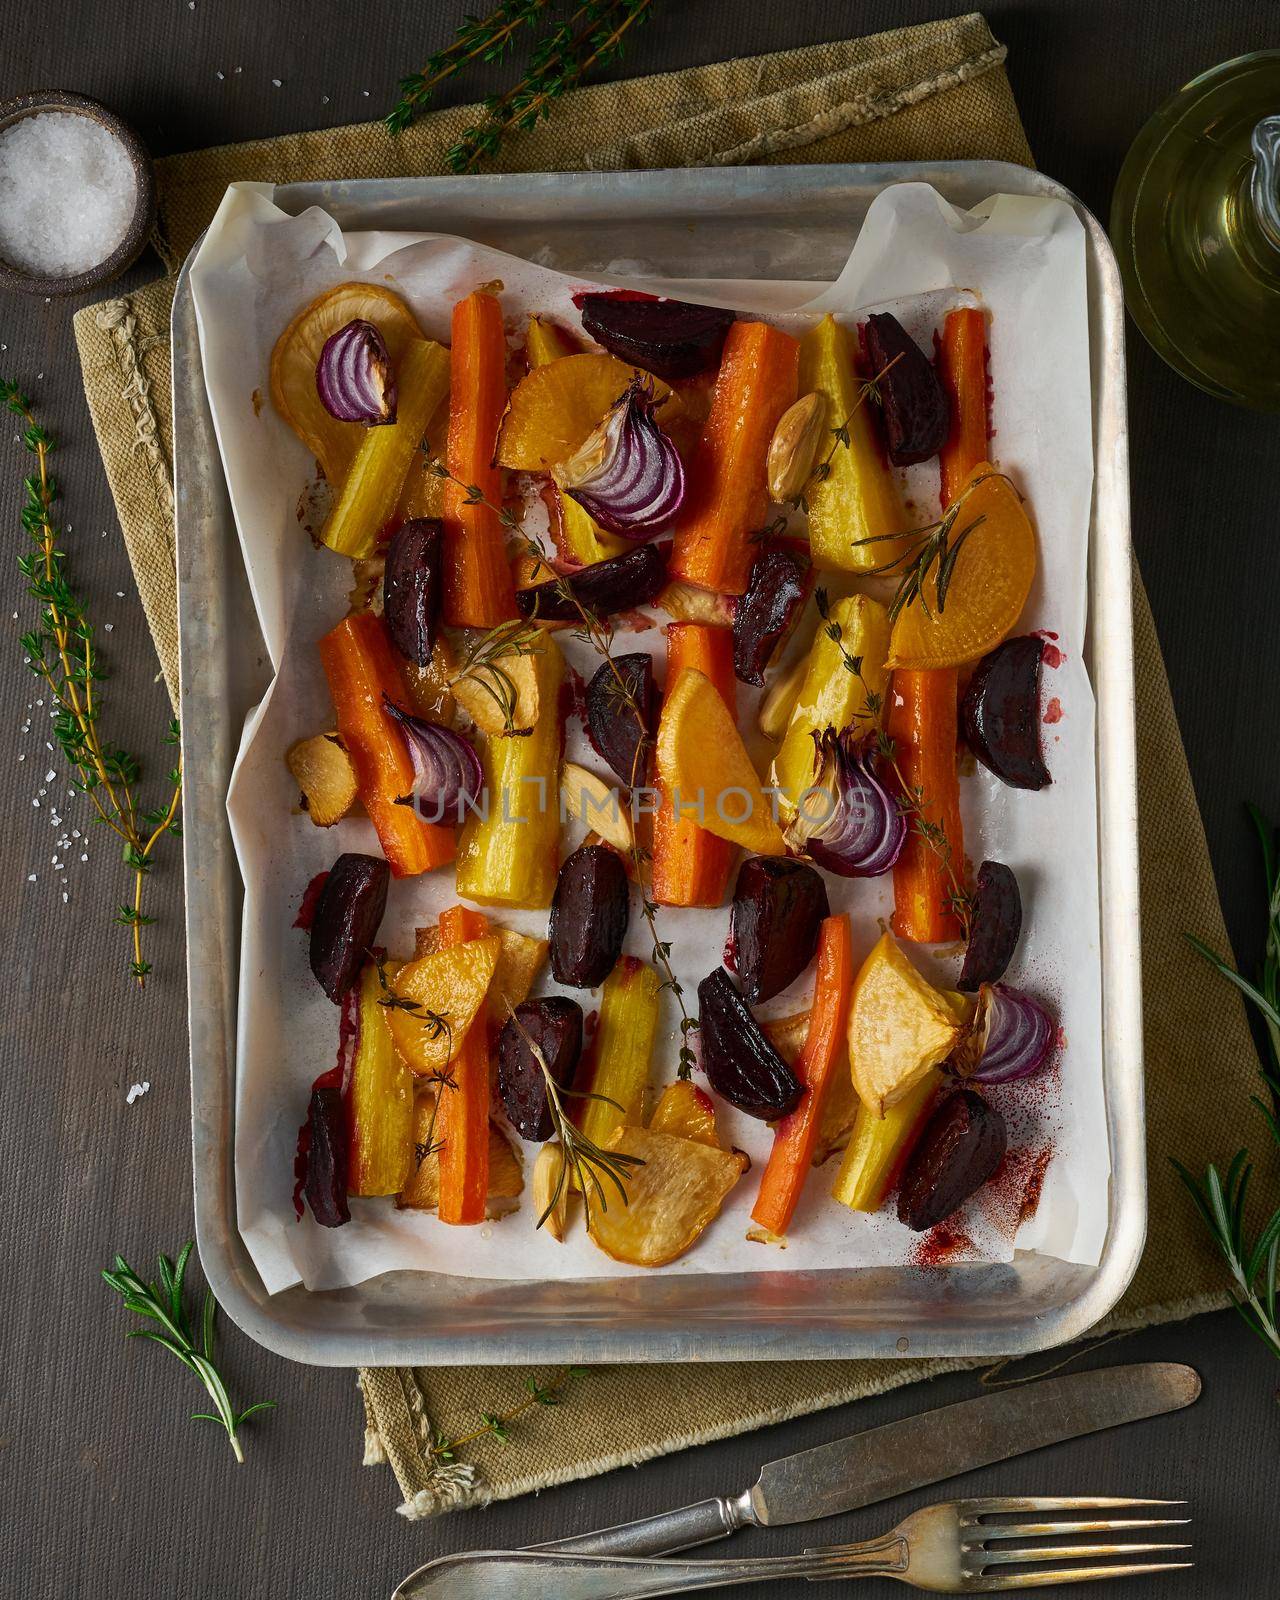 Colorful roasted vegetables on tray with parchment. Mix of carrots, beets, turnips, by NataBene